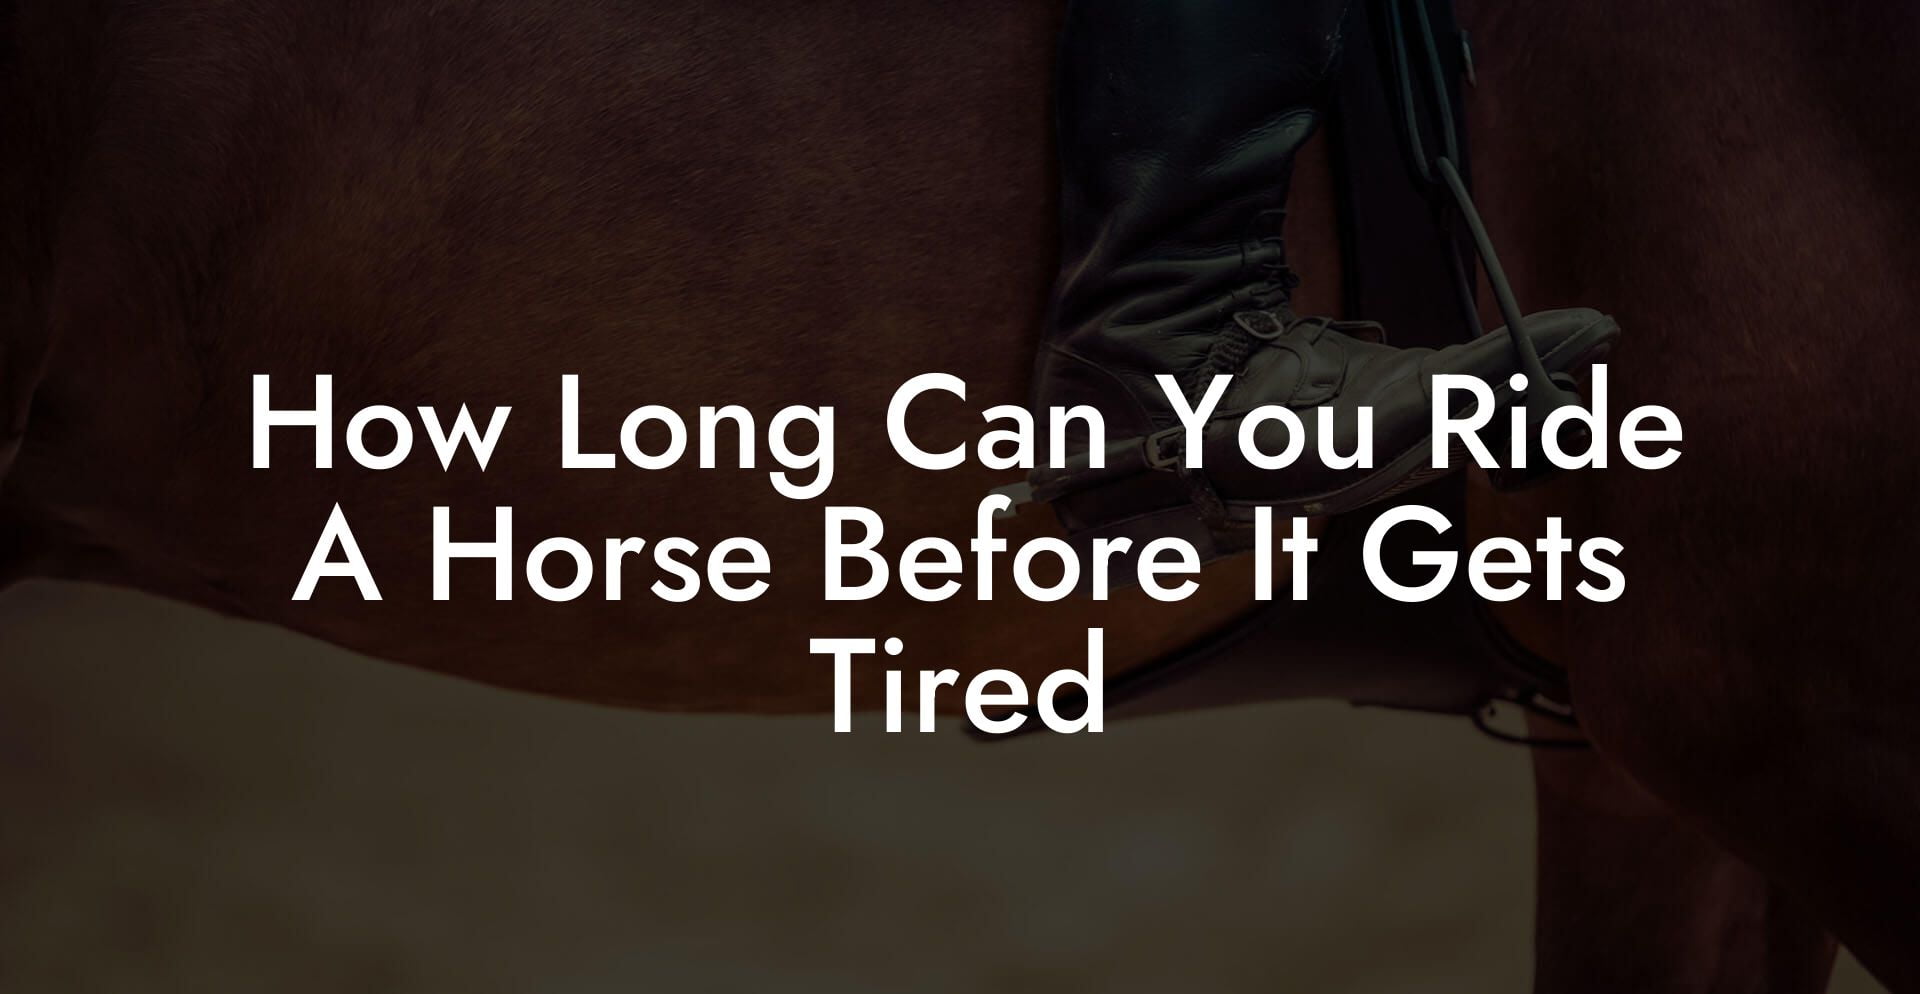 How Long Can You Ride A Horse Before It Gets Tired